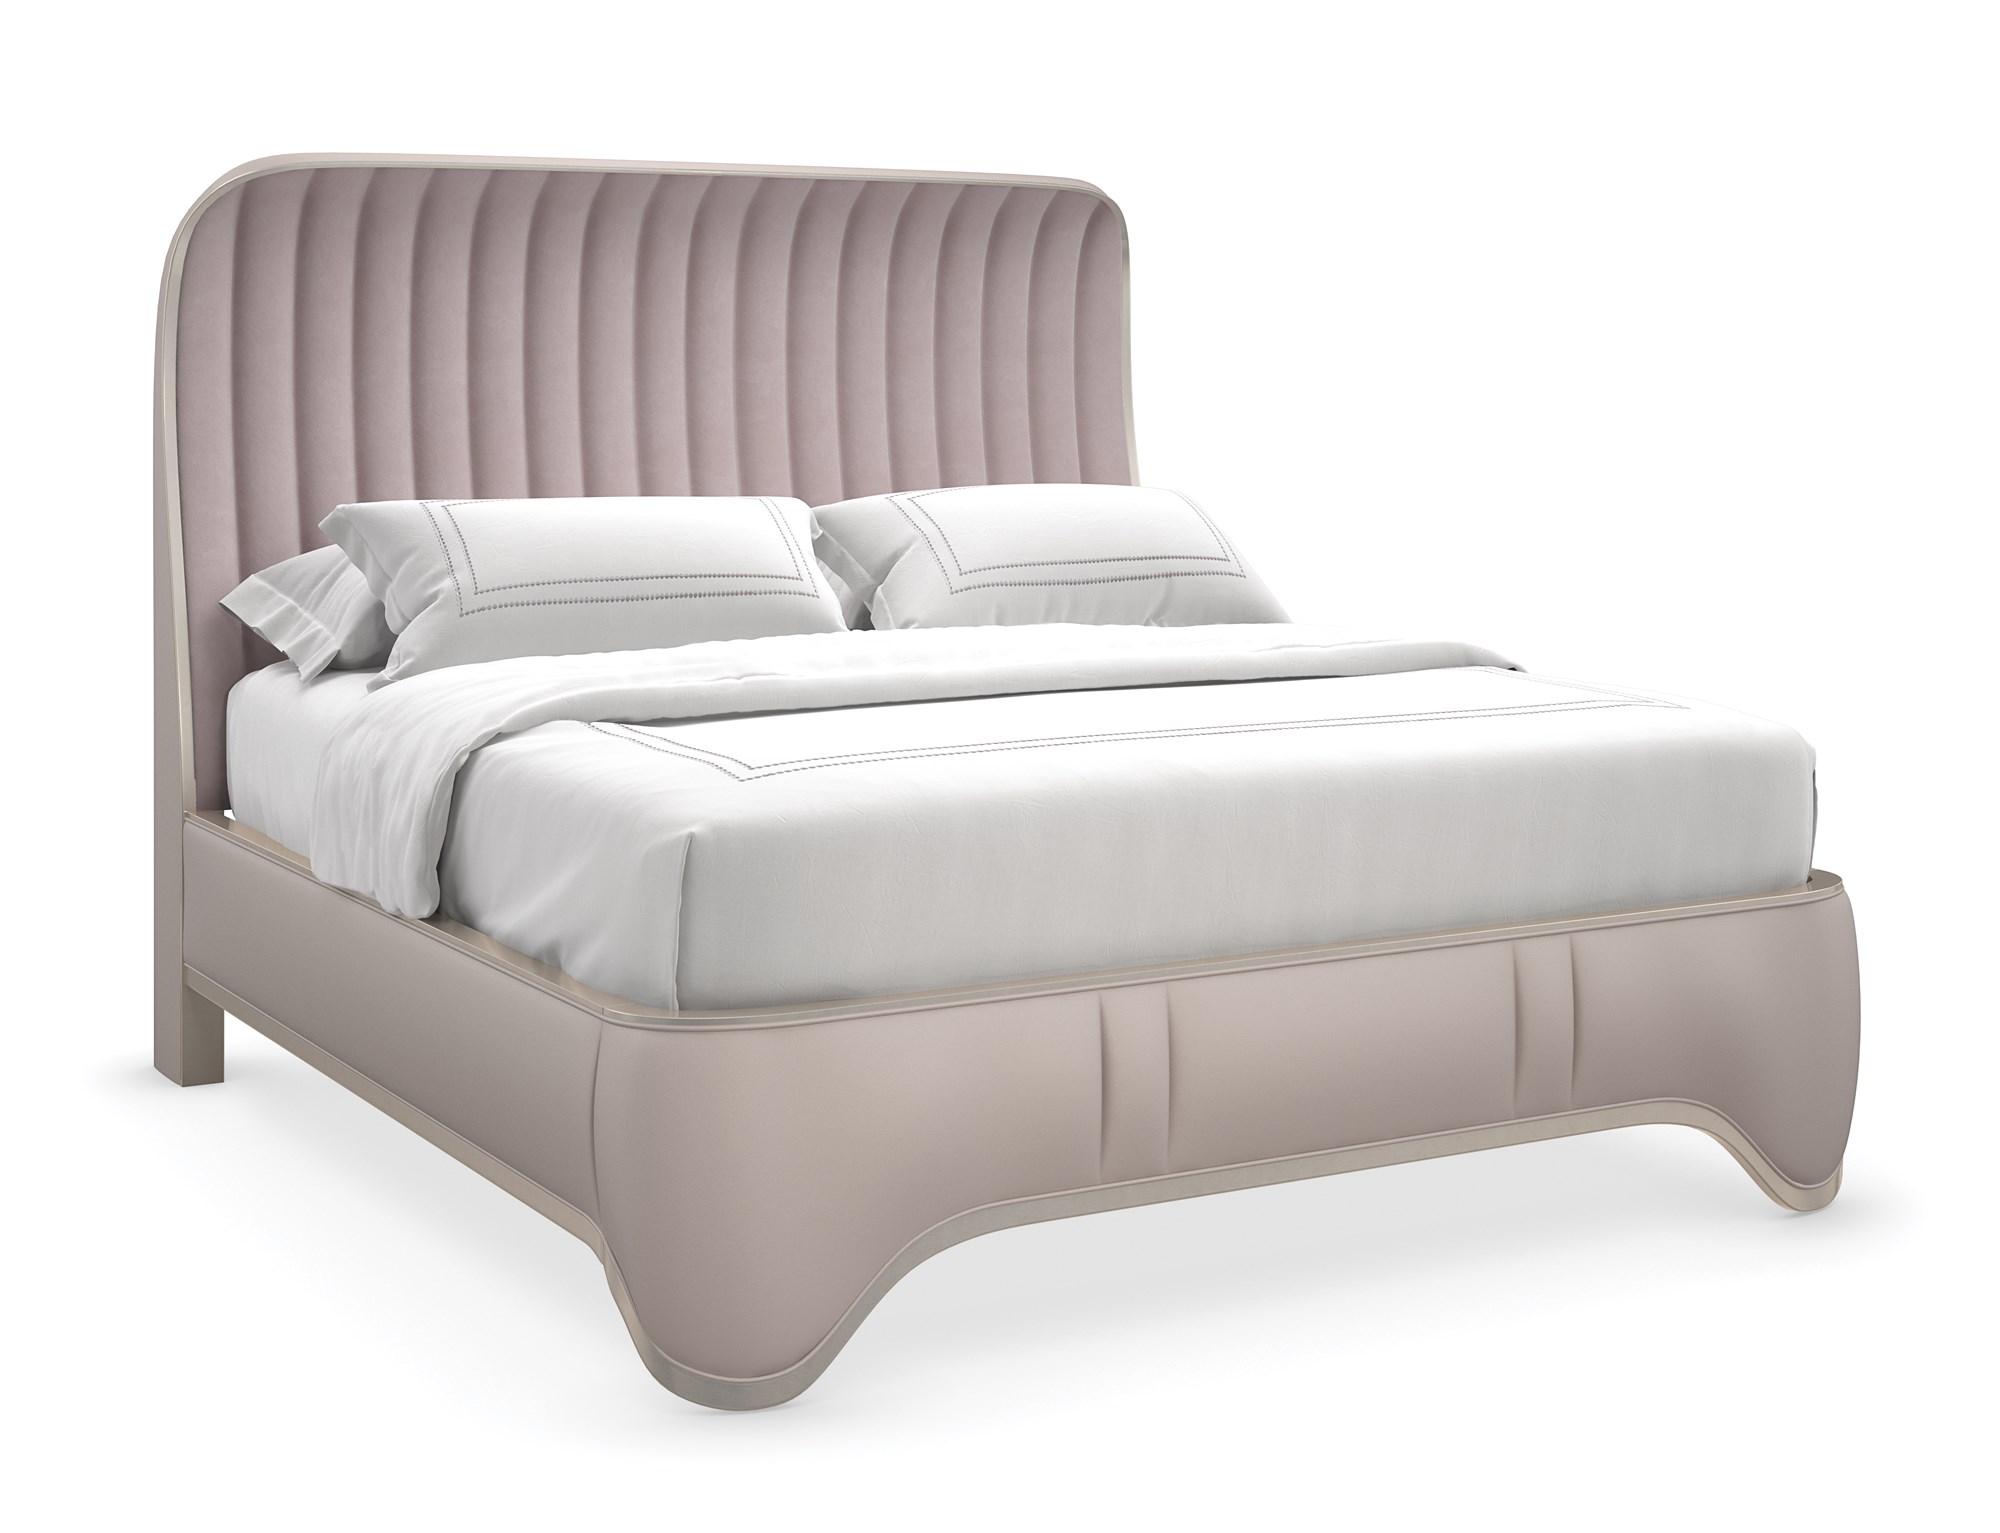 

    
Diamond Chenille Fabric Warm Metallic Finish THE OXFORD UPH KING BED by Caracole
